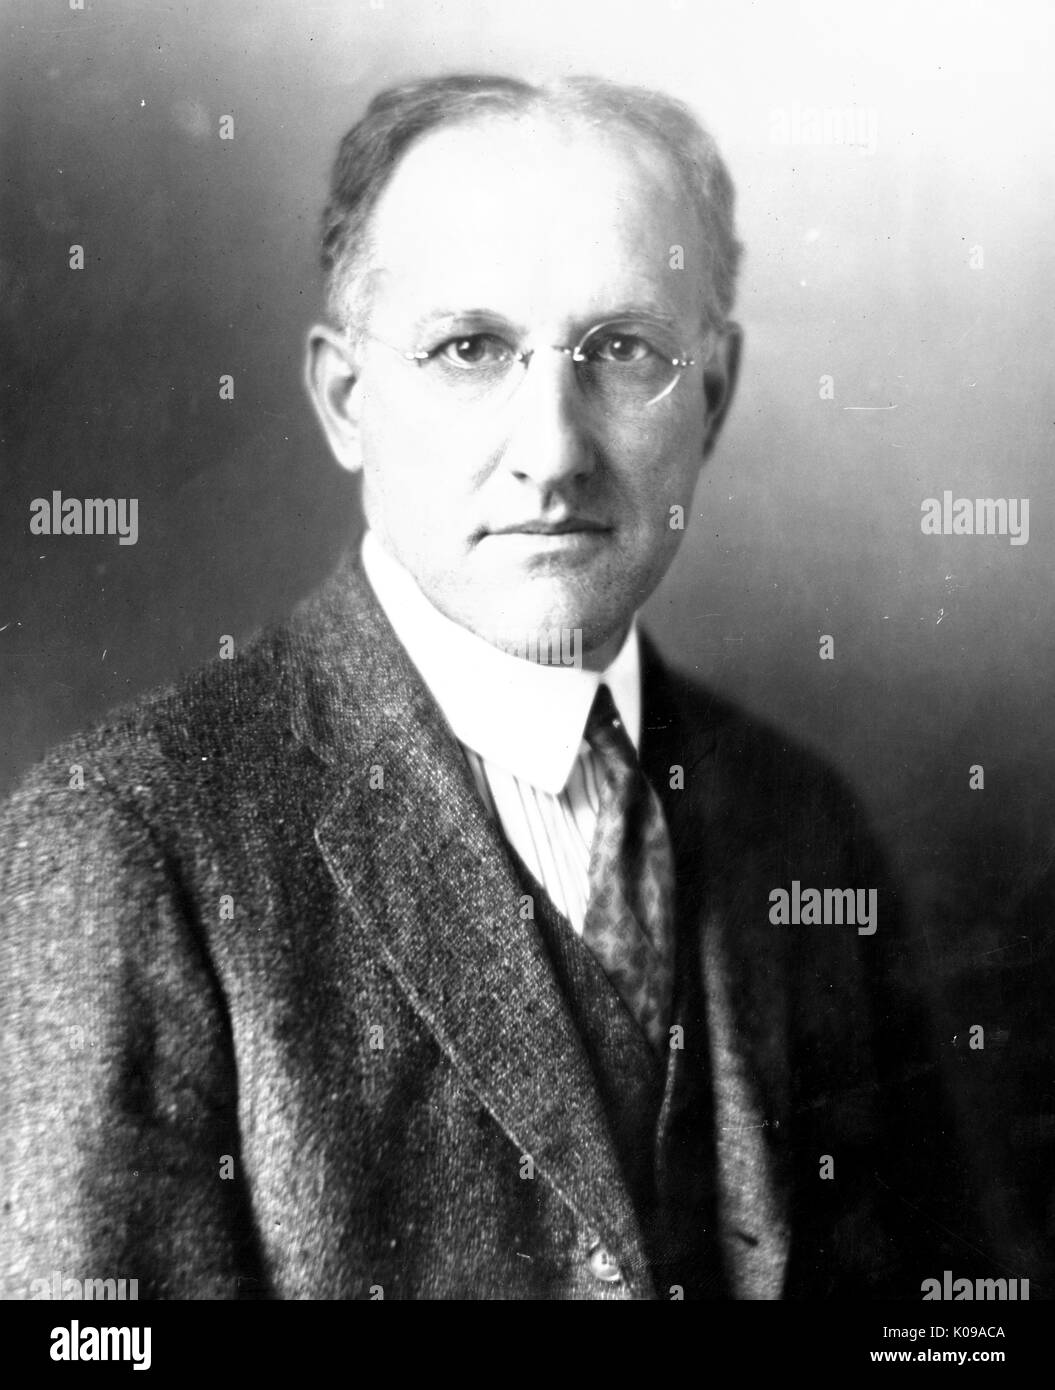 Half-length of Dr. Samuel Mast, biology faculty member at the Johns Hopkins University, wearing a dark three piece suit and a dark tie with a striped shirt and circular glasses with no rim, in front of a backdrop, with a serious facial expression. 1935. Stock Photo